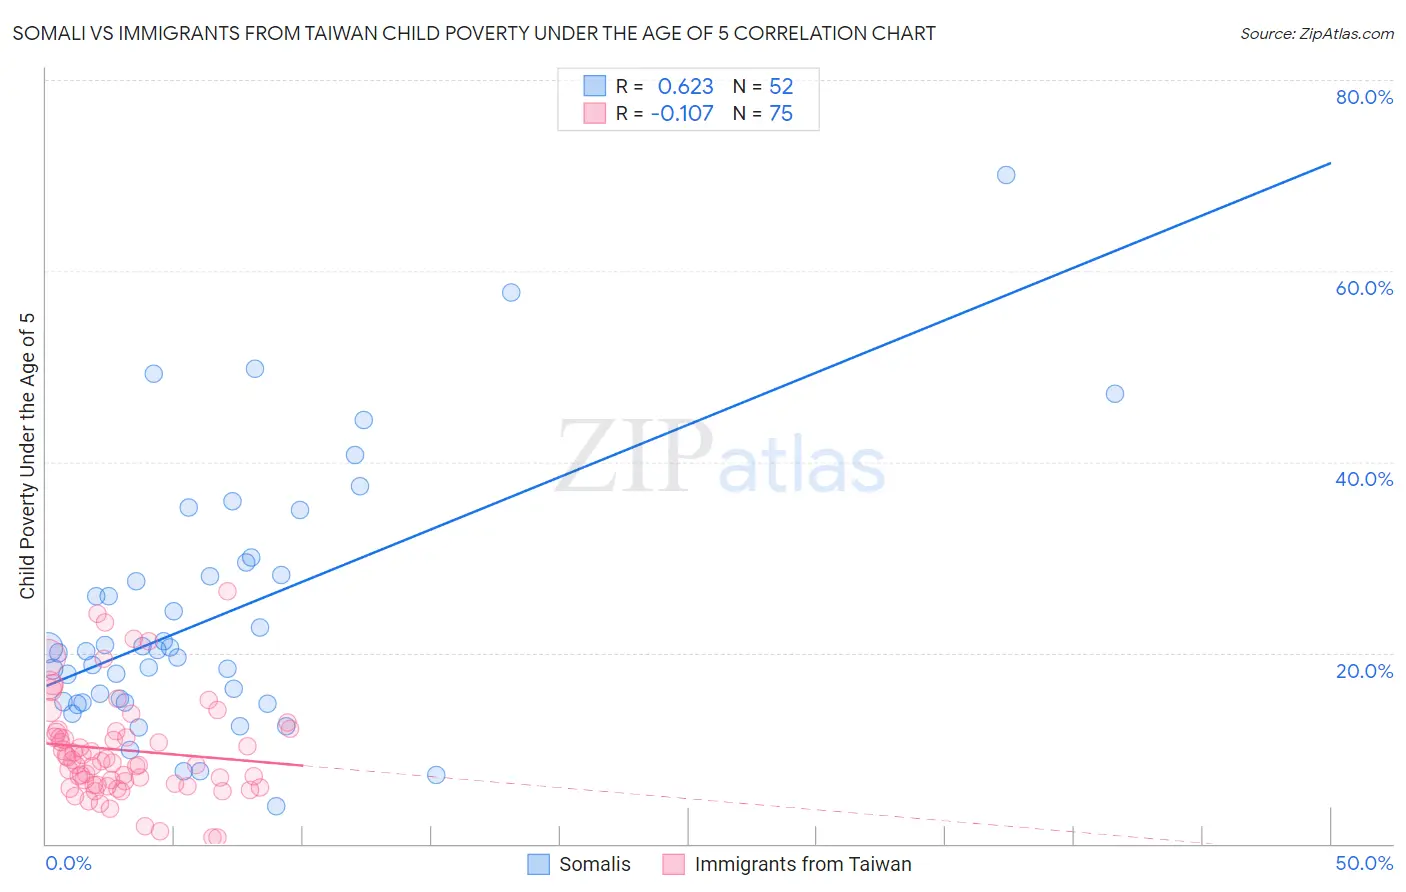 Somali vs Immigrants from Taiwan Child Poverty Under the Age of 5